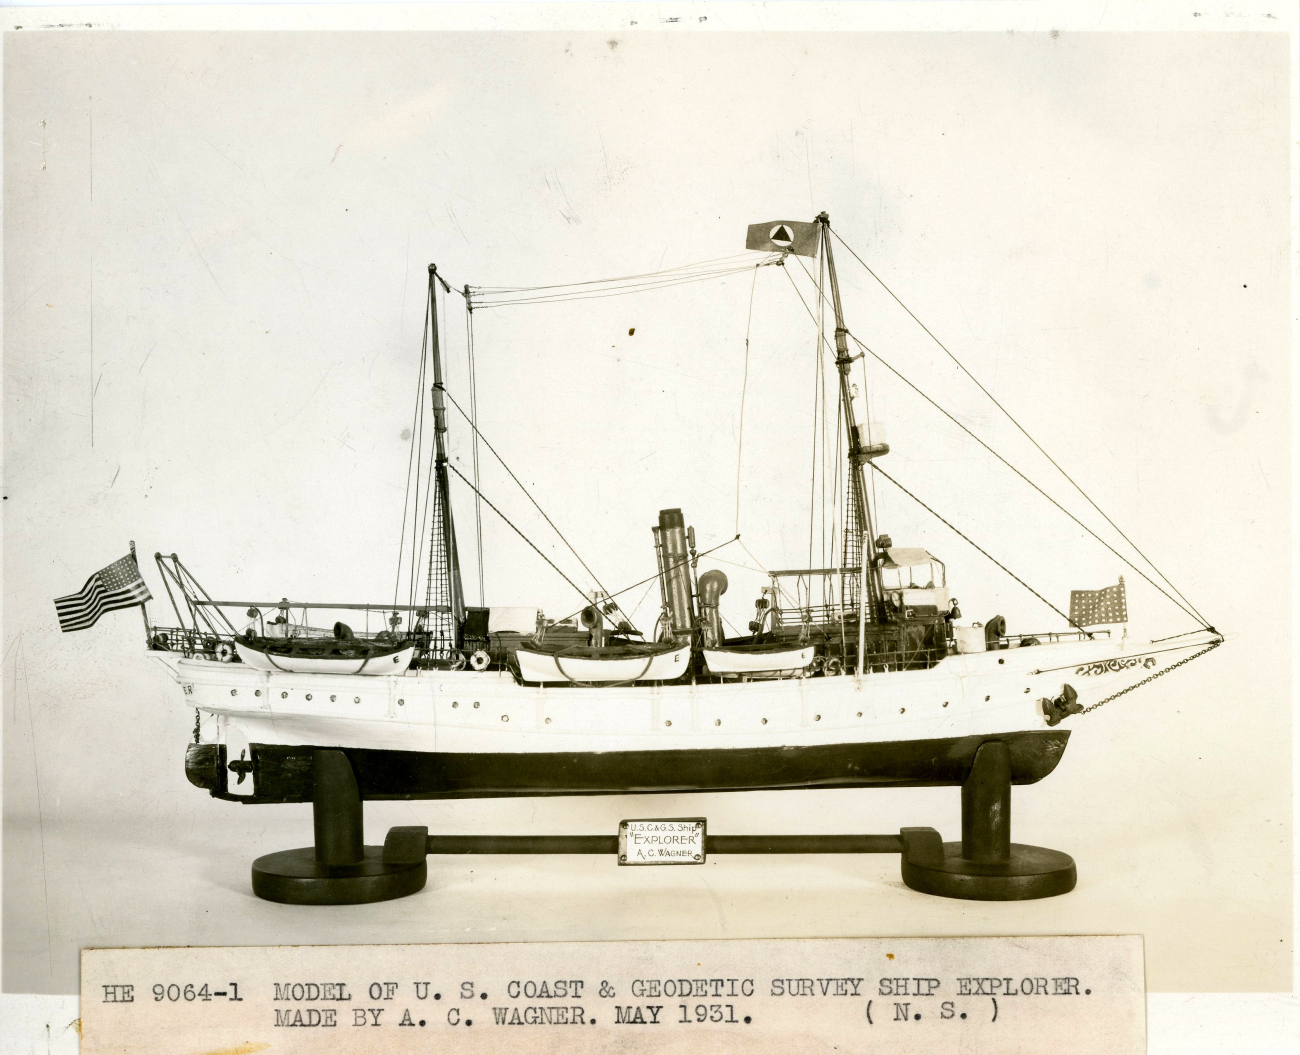 Starboard side view of model of the first USC&GS; Ship EXPLORER